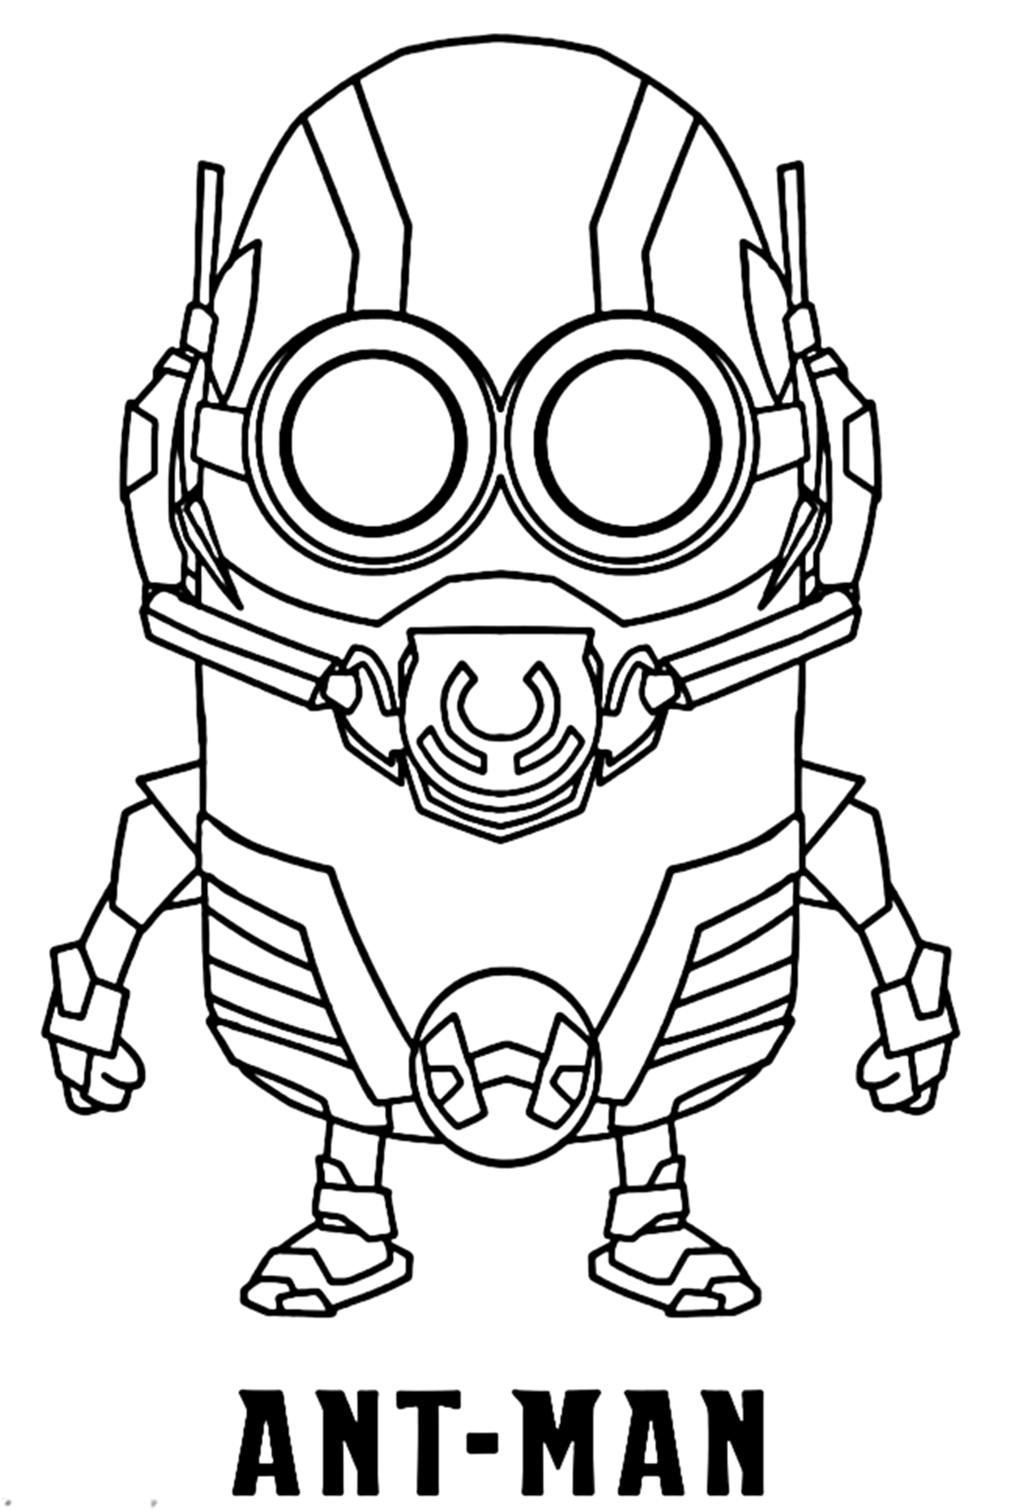 Chibi Cute Robot Ant-man In Ant-man cartoon Coloring Pages